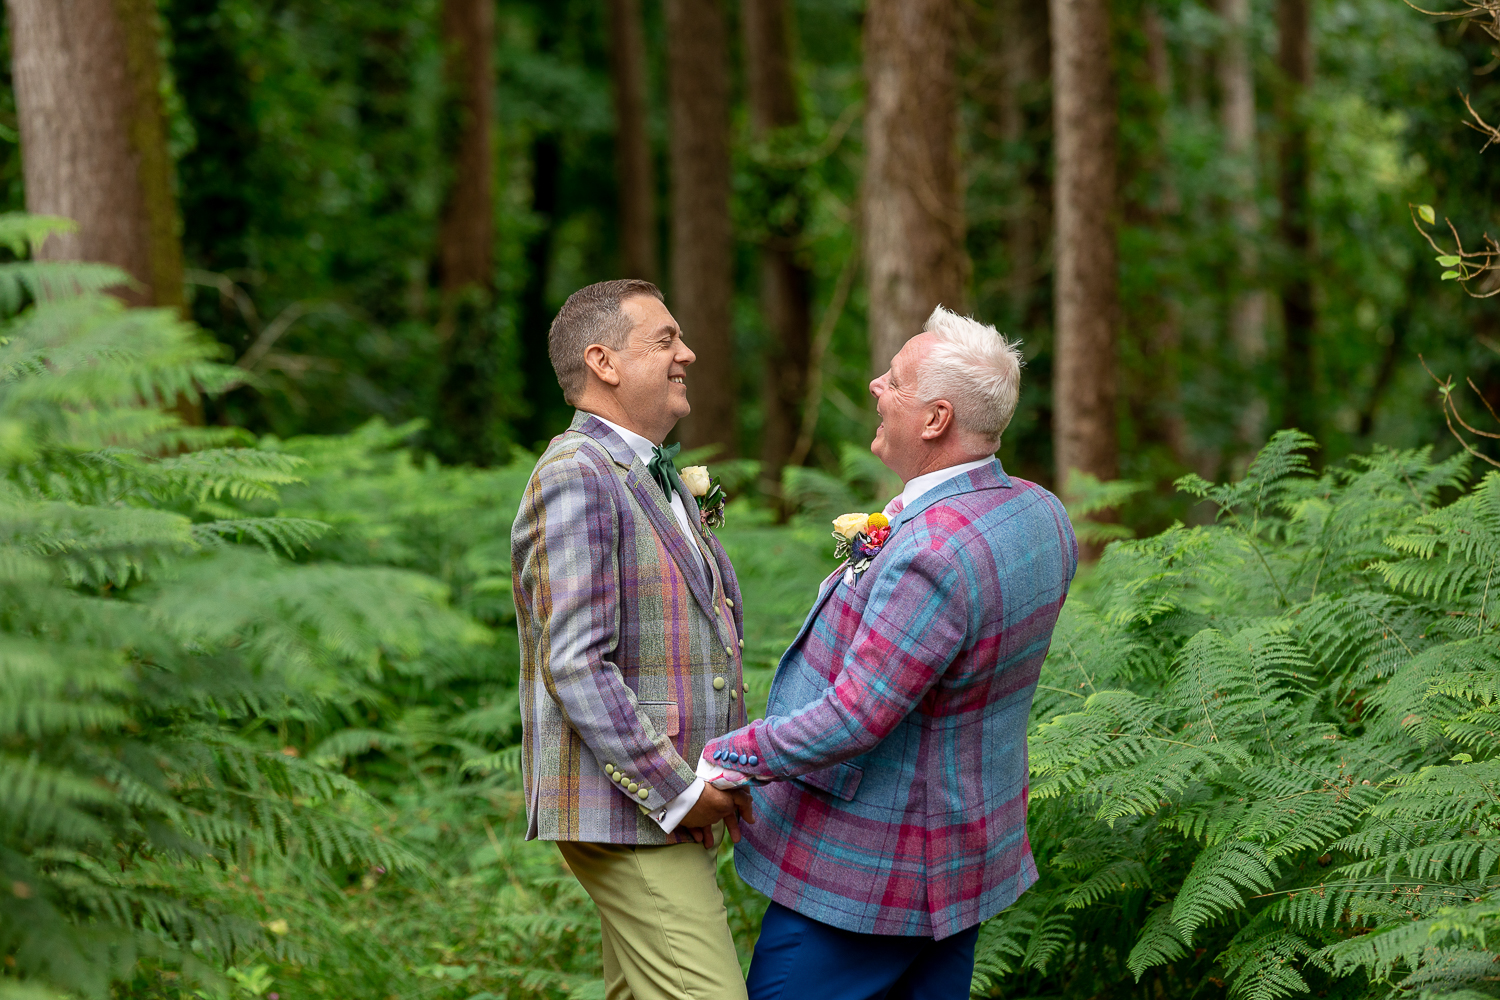 South Wales wedding photographer capturing two men standing in the woods, holding hands.